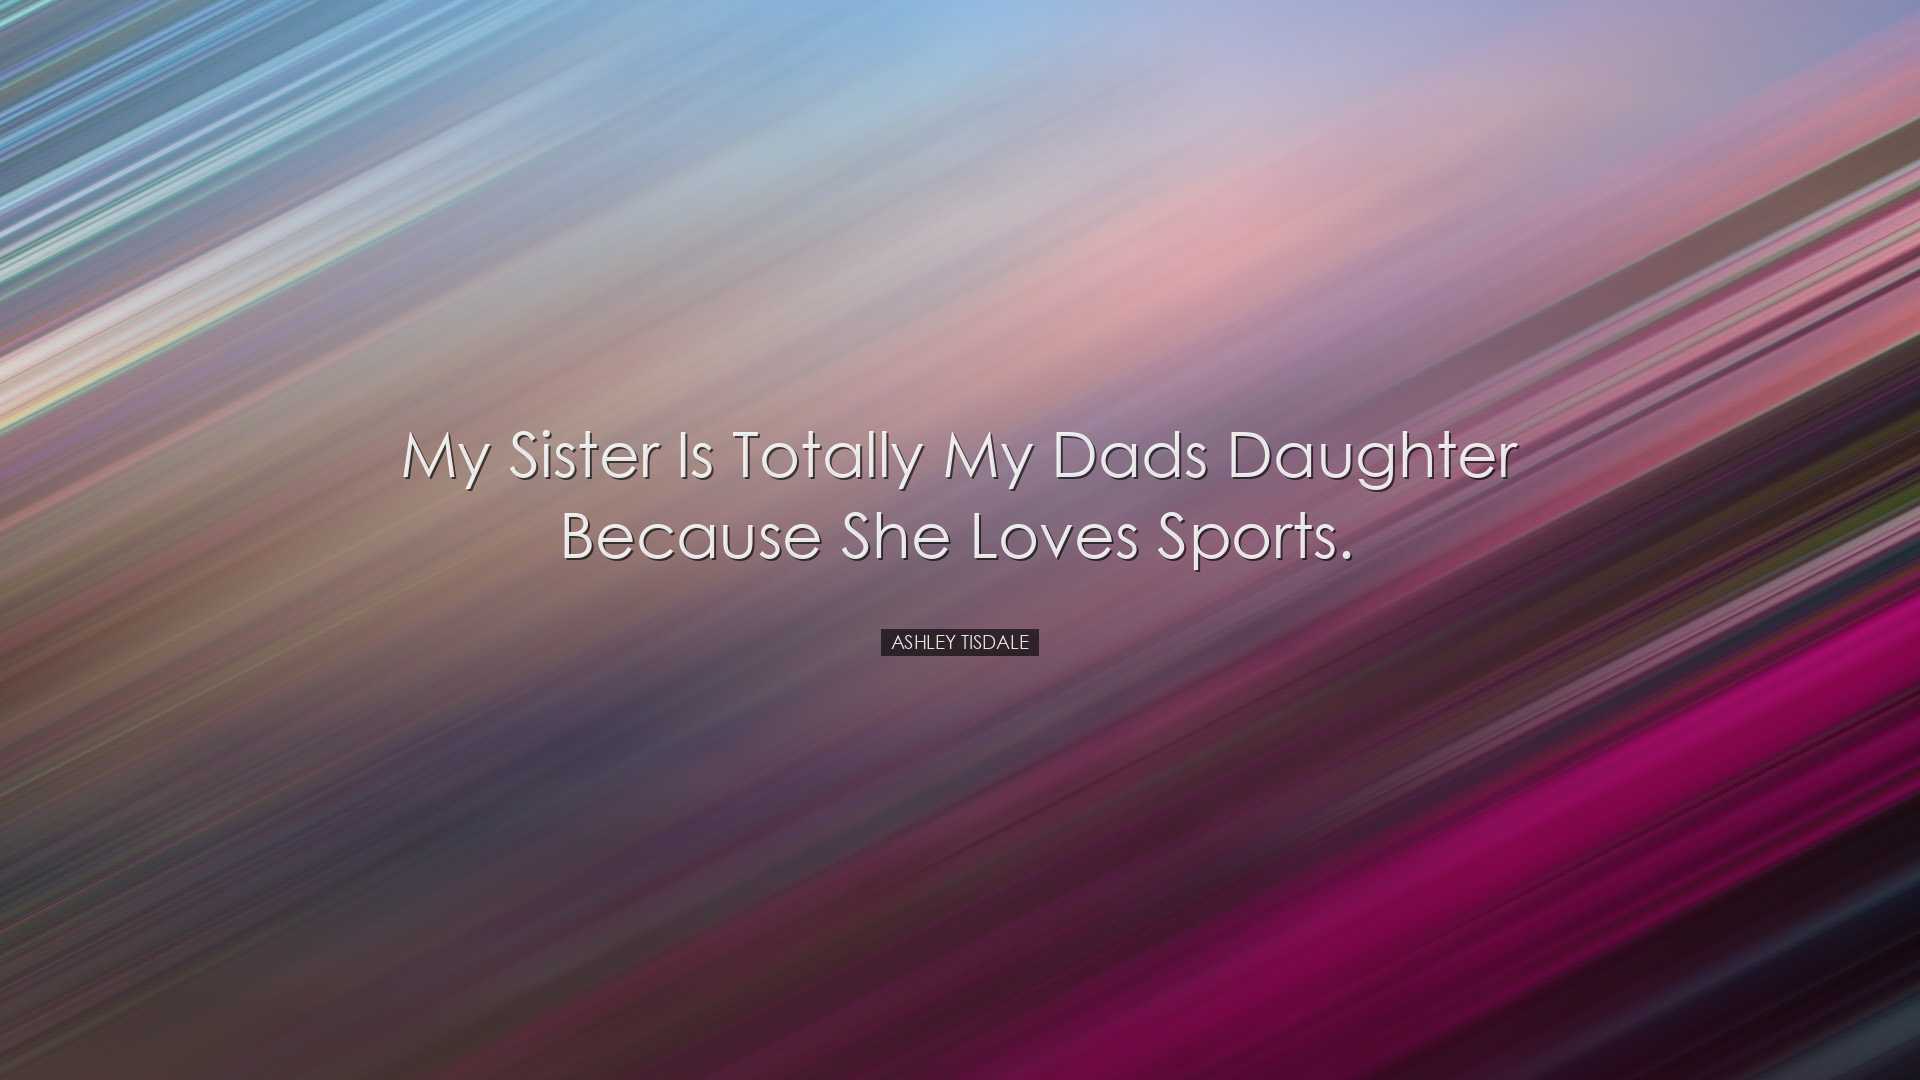 My sister is totally my dads daughter because she loves sports. -